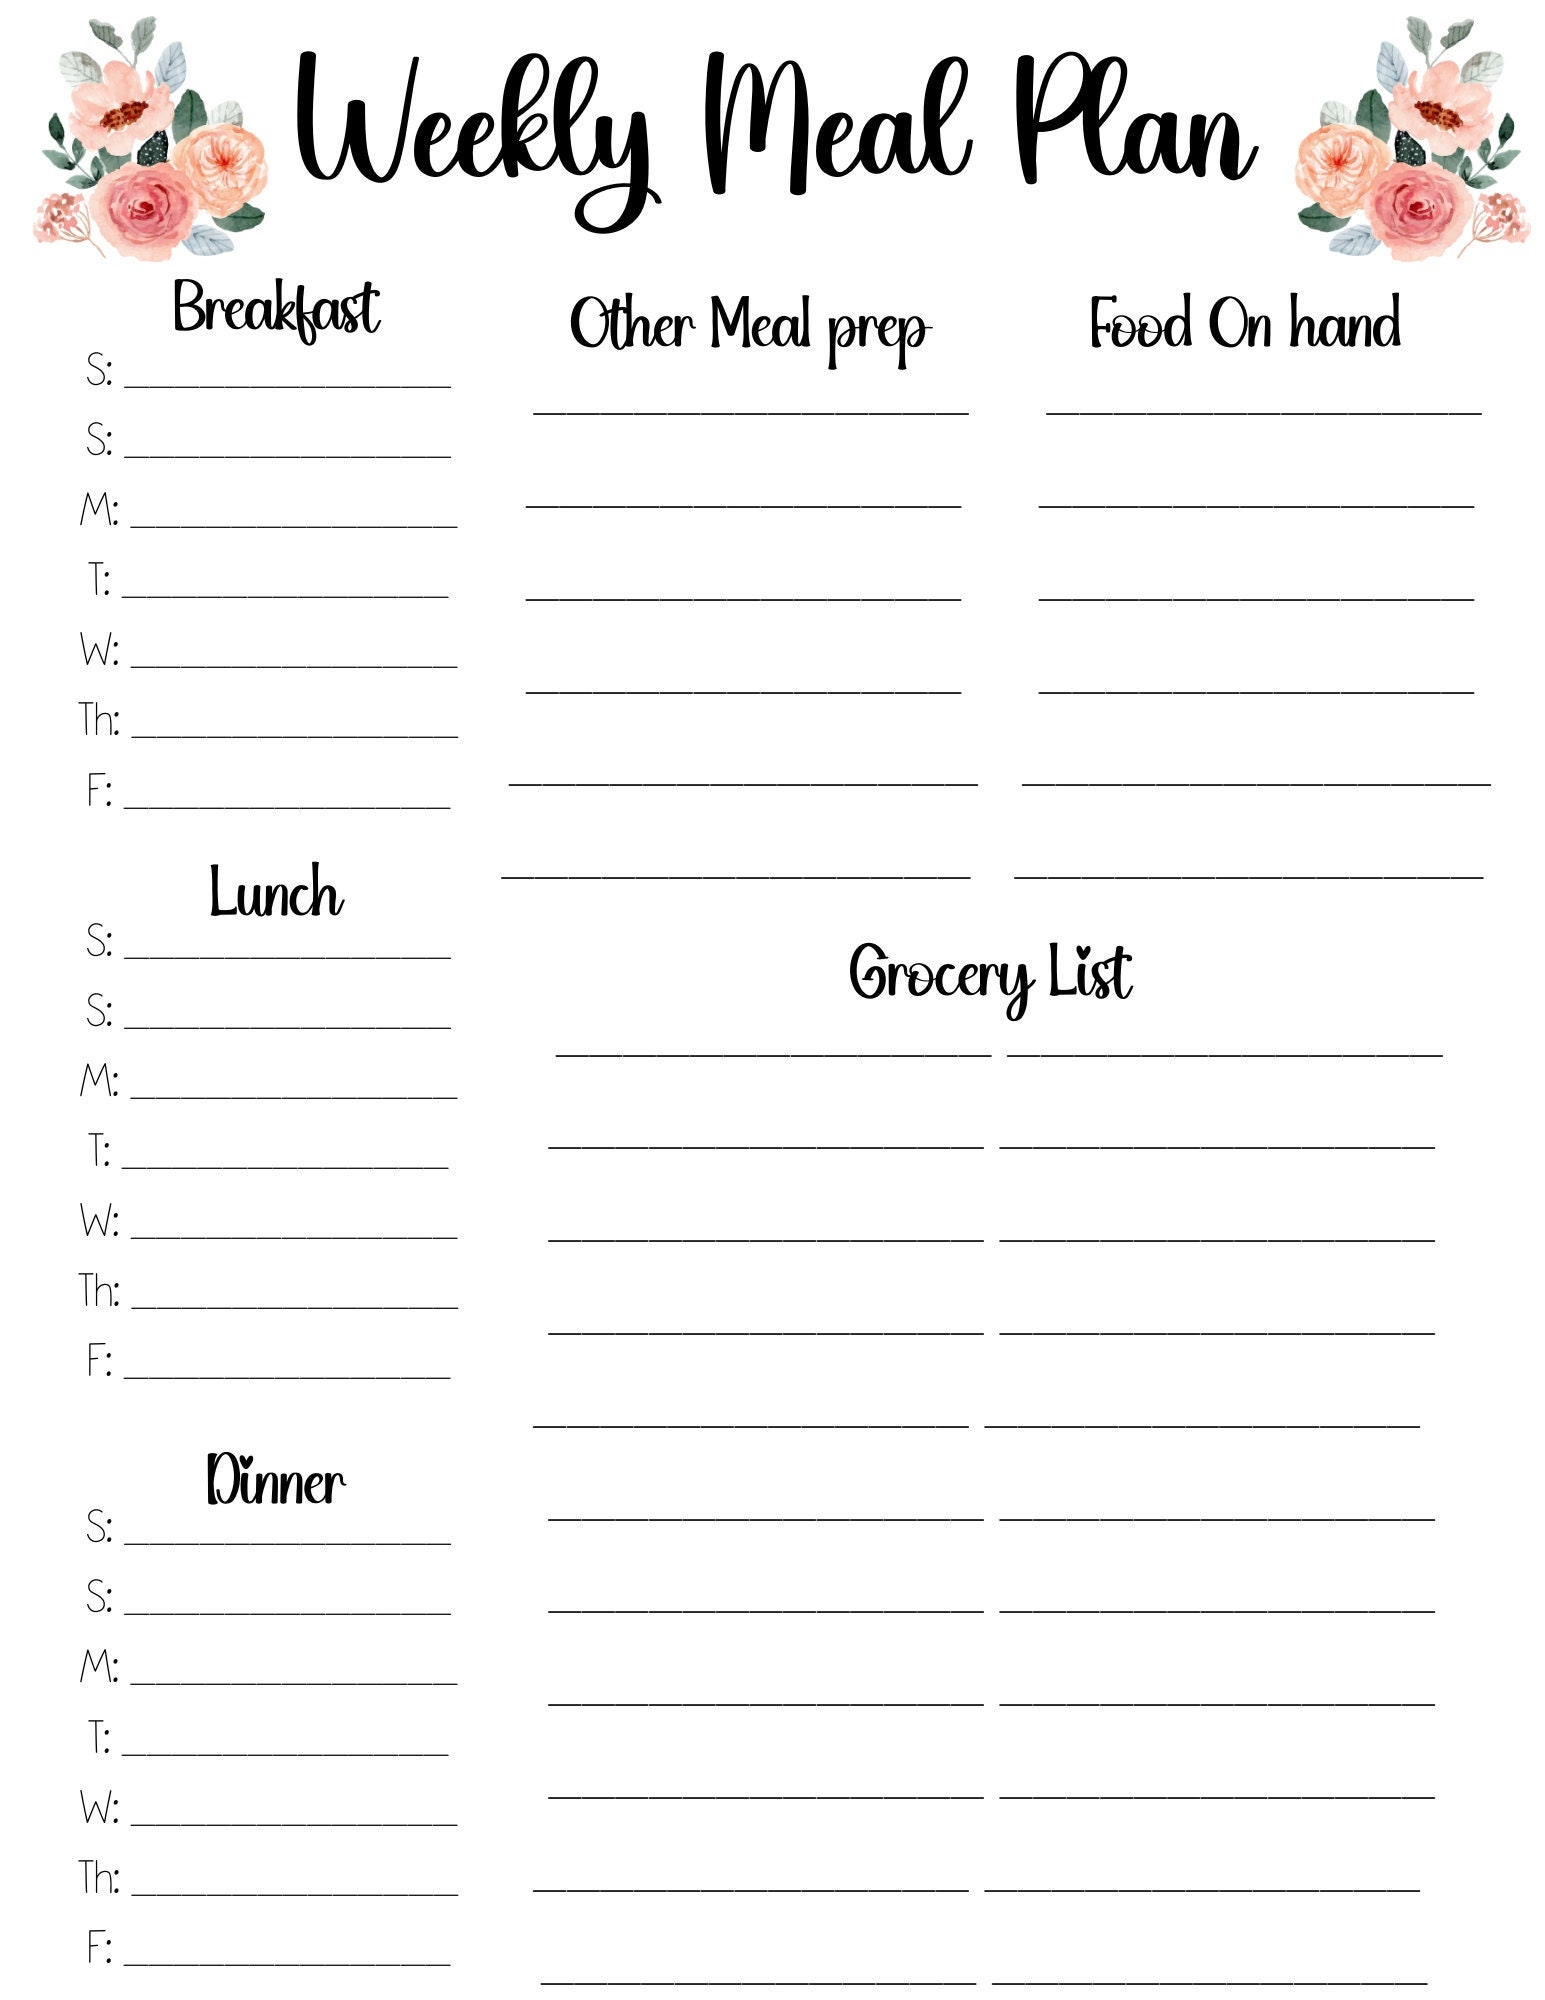 Weekly Meal Plan Template - Etsy